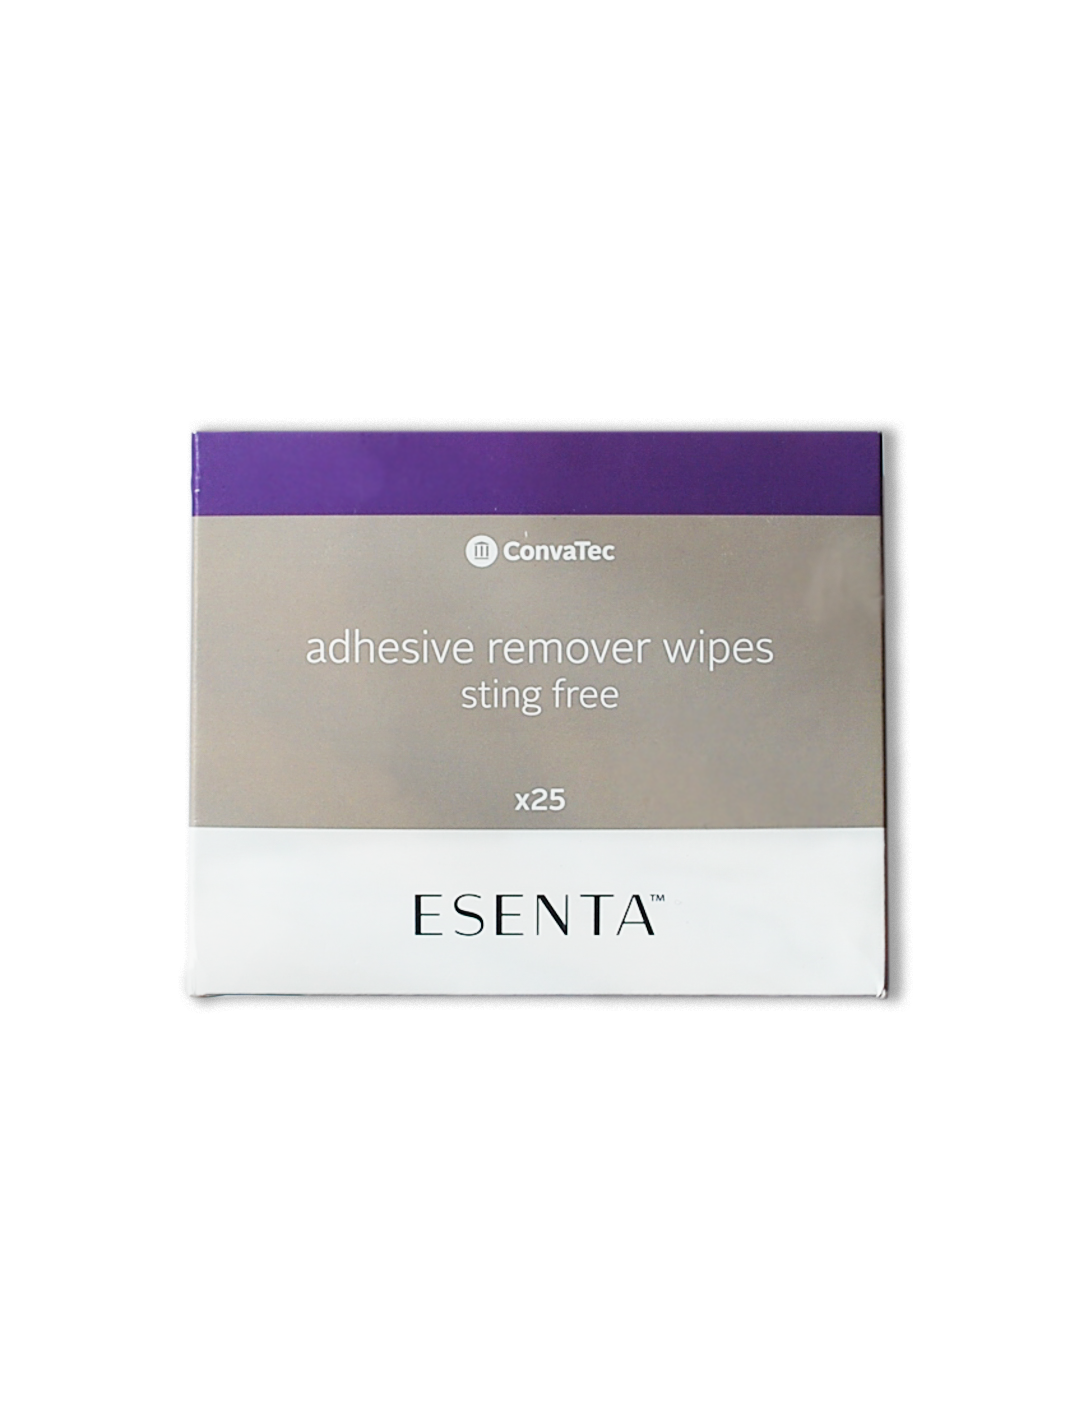 Sting Free Adhesive Remover Wipes